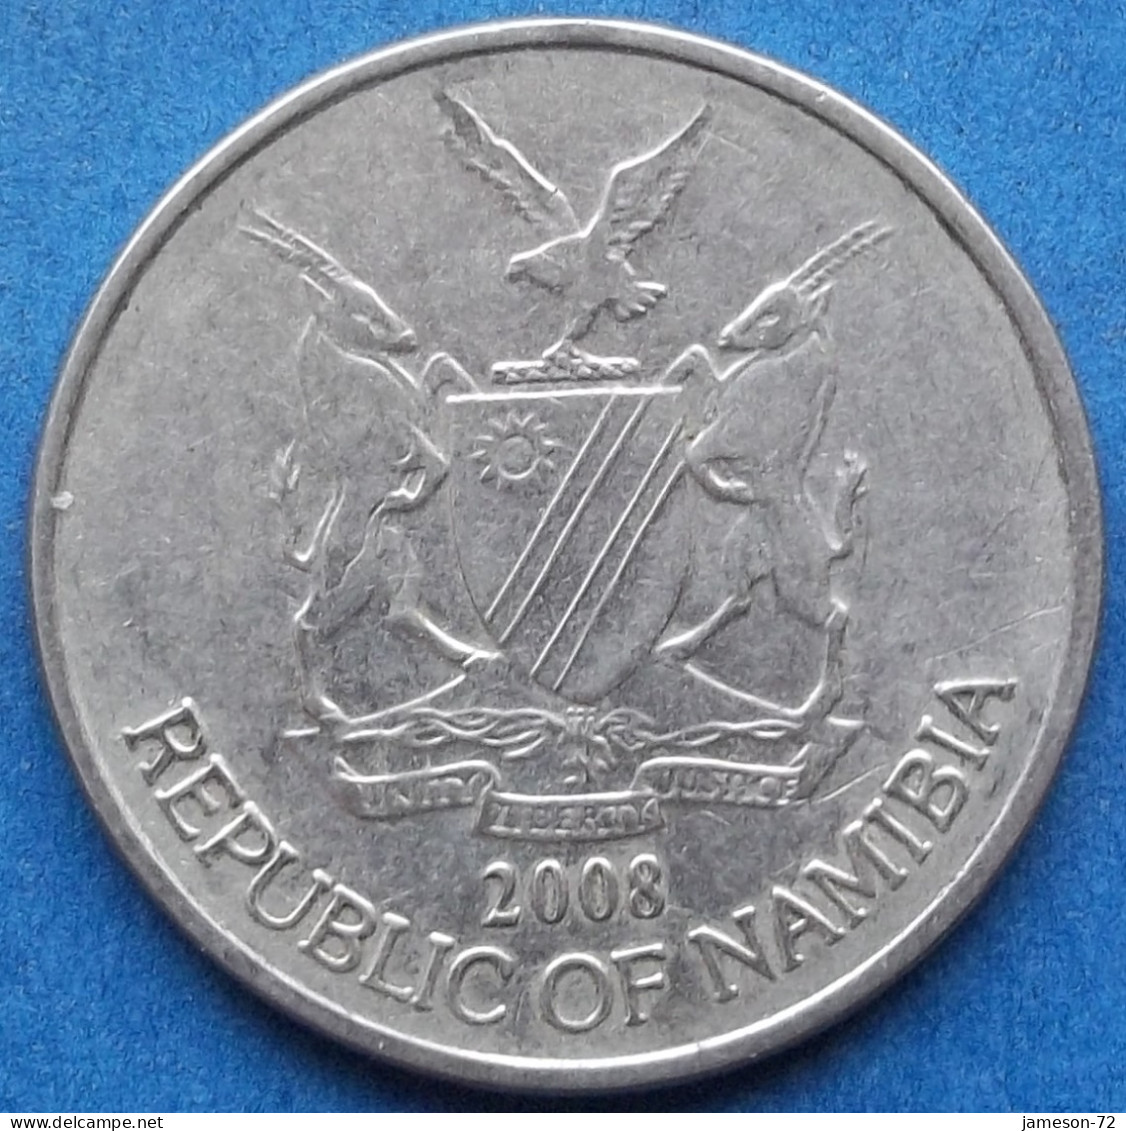 NAMIBIA - 50 Cents 2008 "Quiver Tree" KM# 3 Independent Republic (1990) - Edelweiss Coins - Namibië